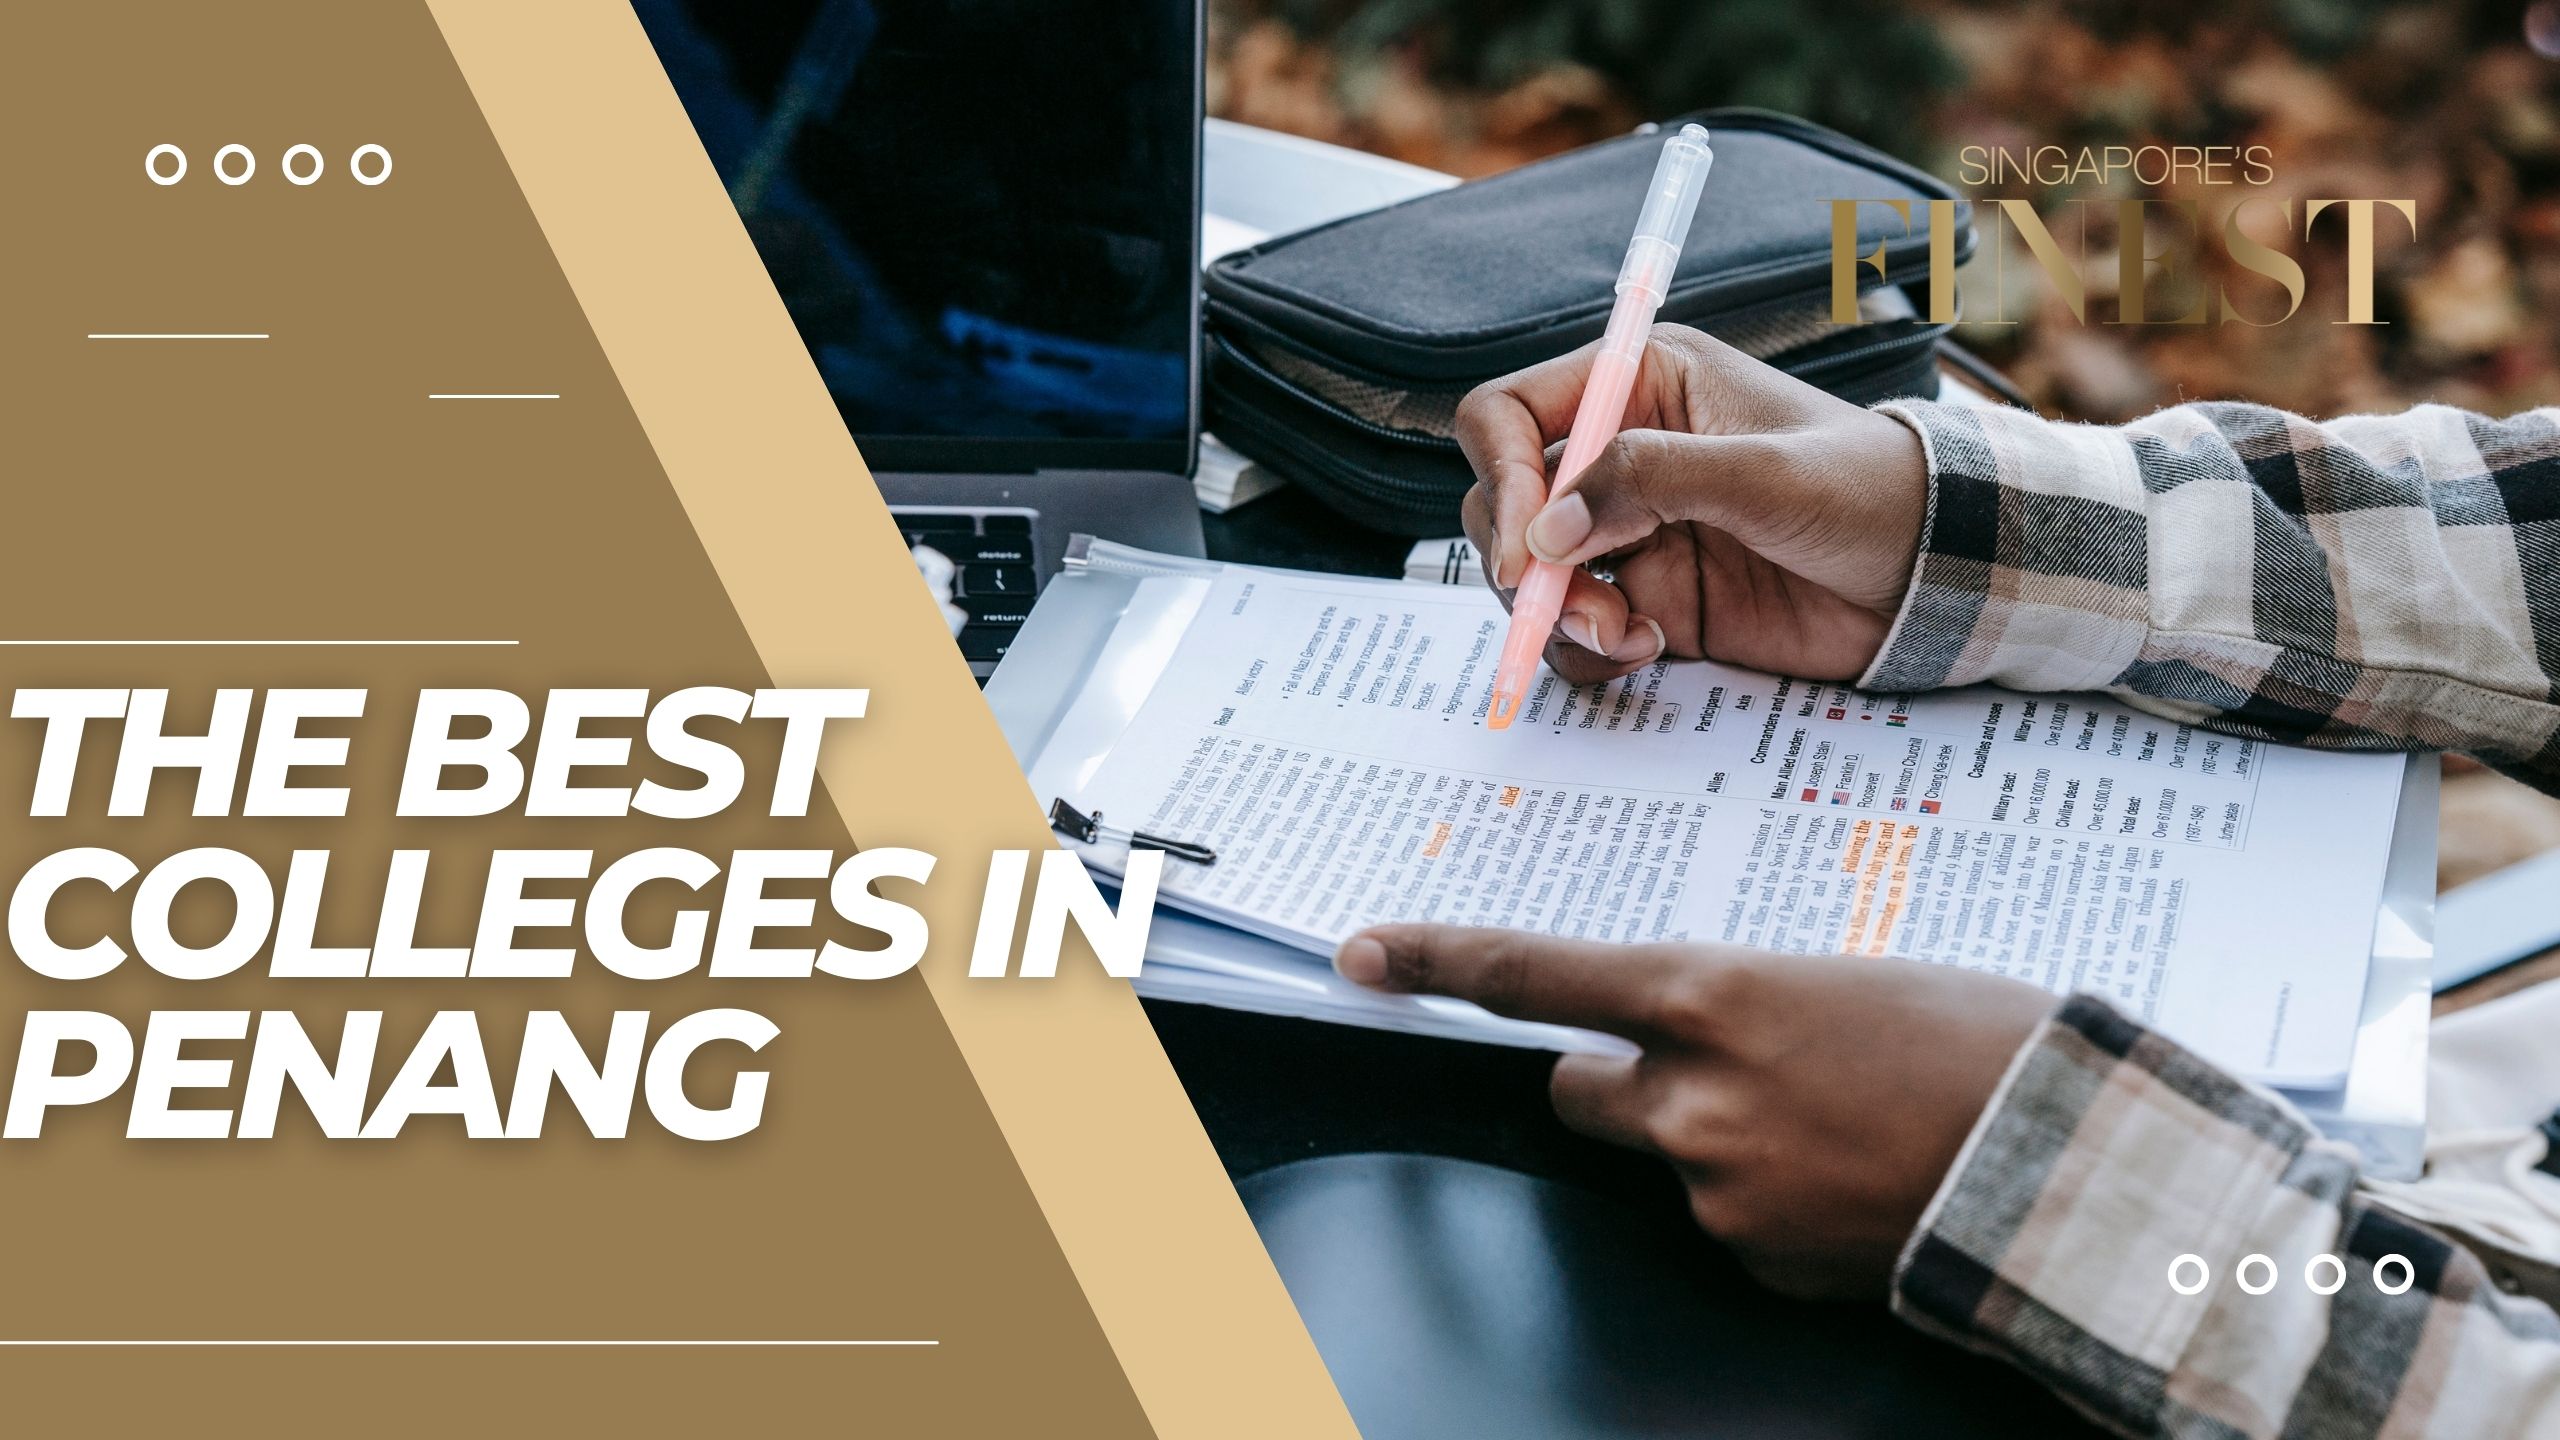 The Finest Colleges in Penang